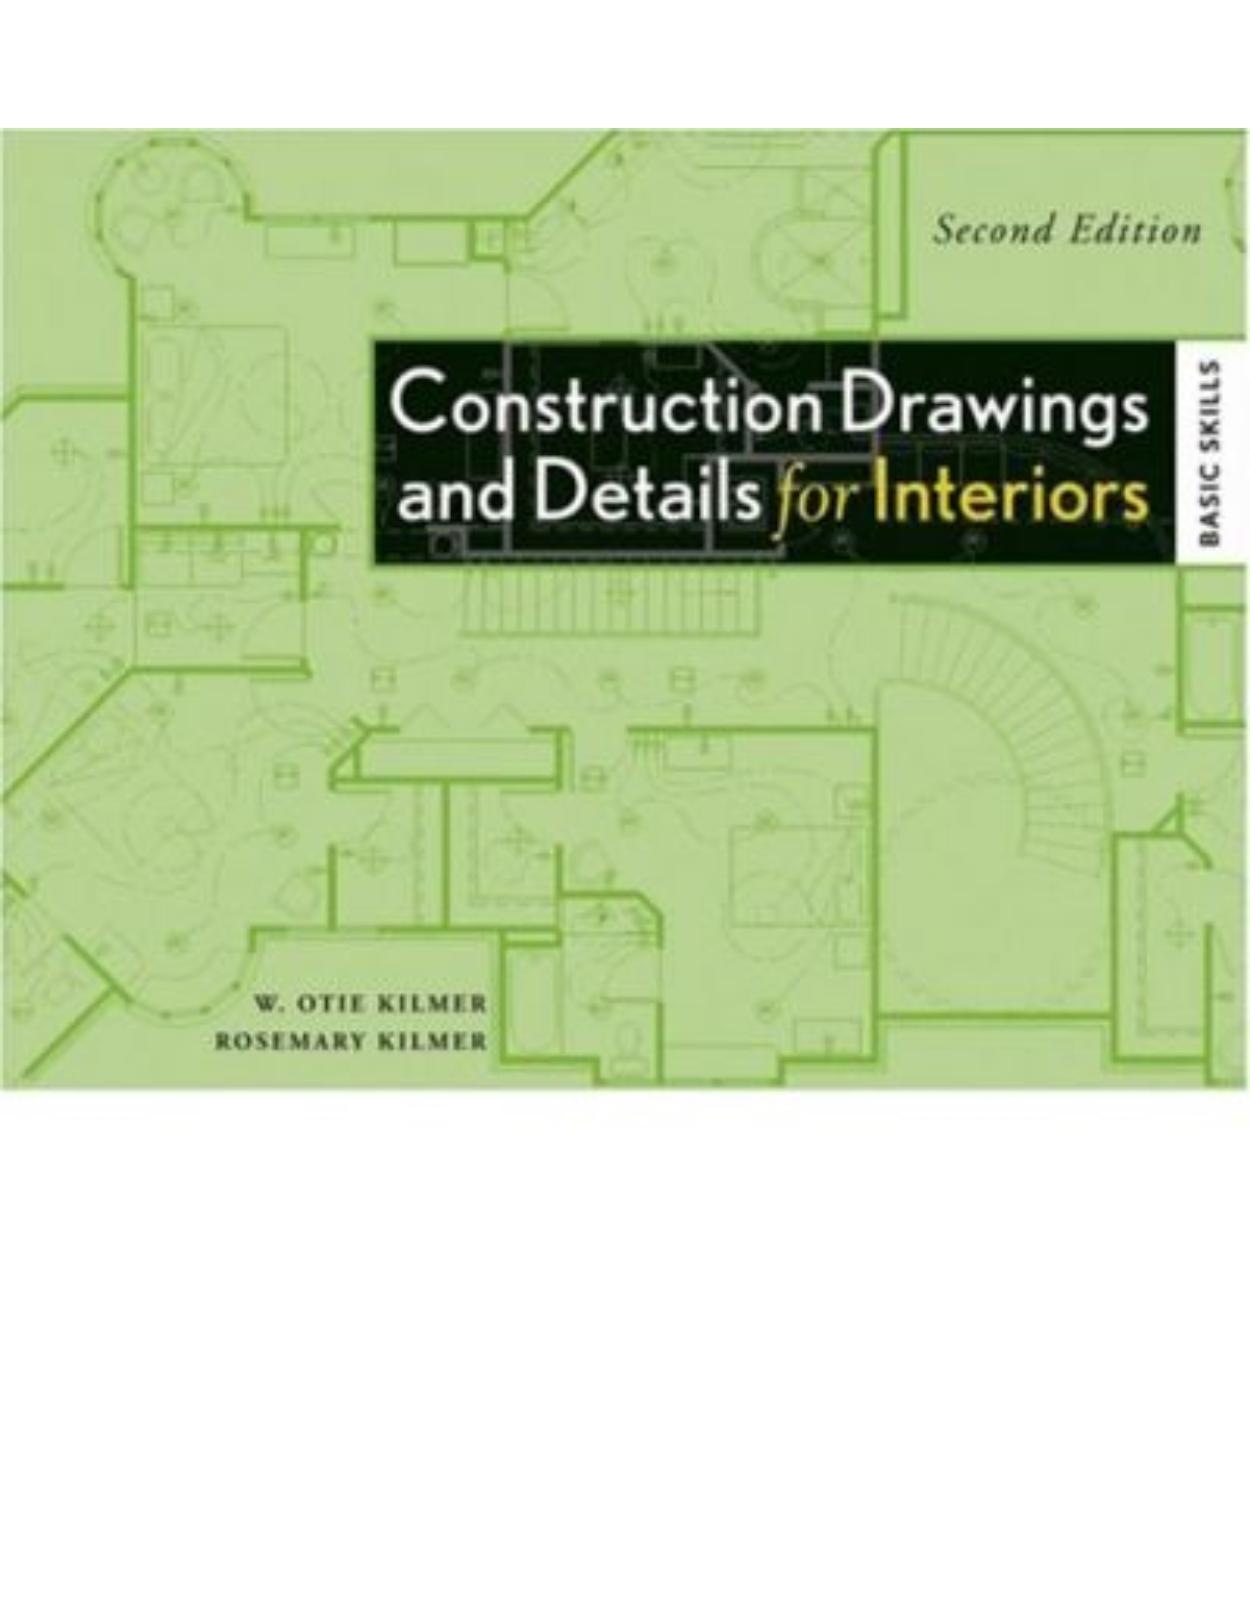 Construction Drawings and Details for Interiors: Basic Skills, 2nd Edition